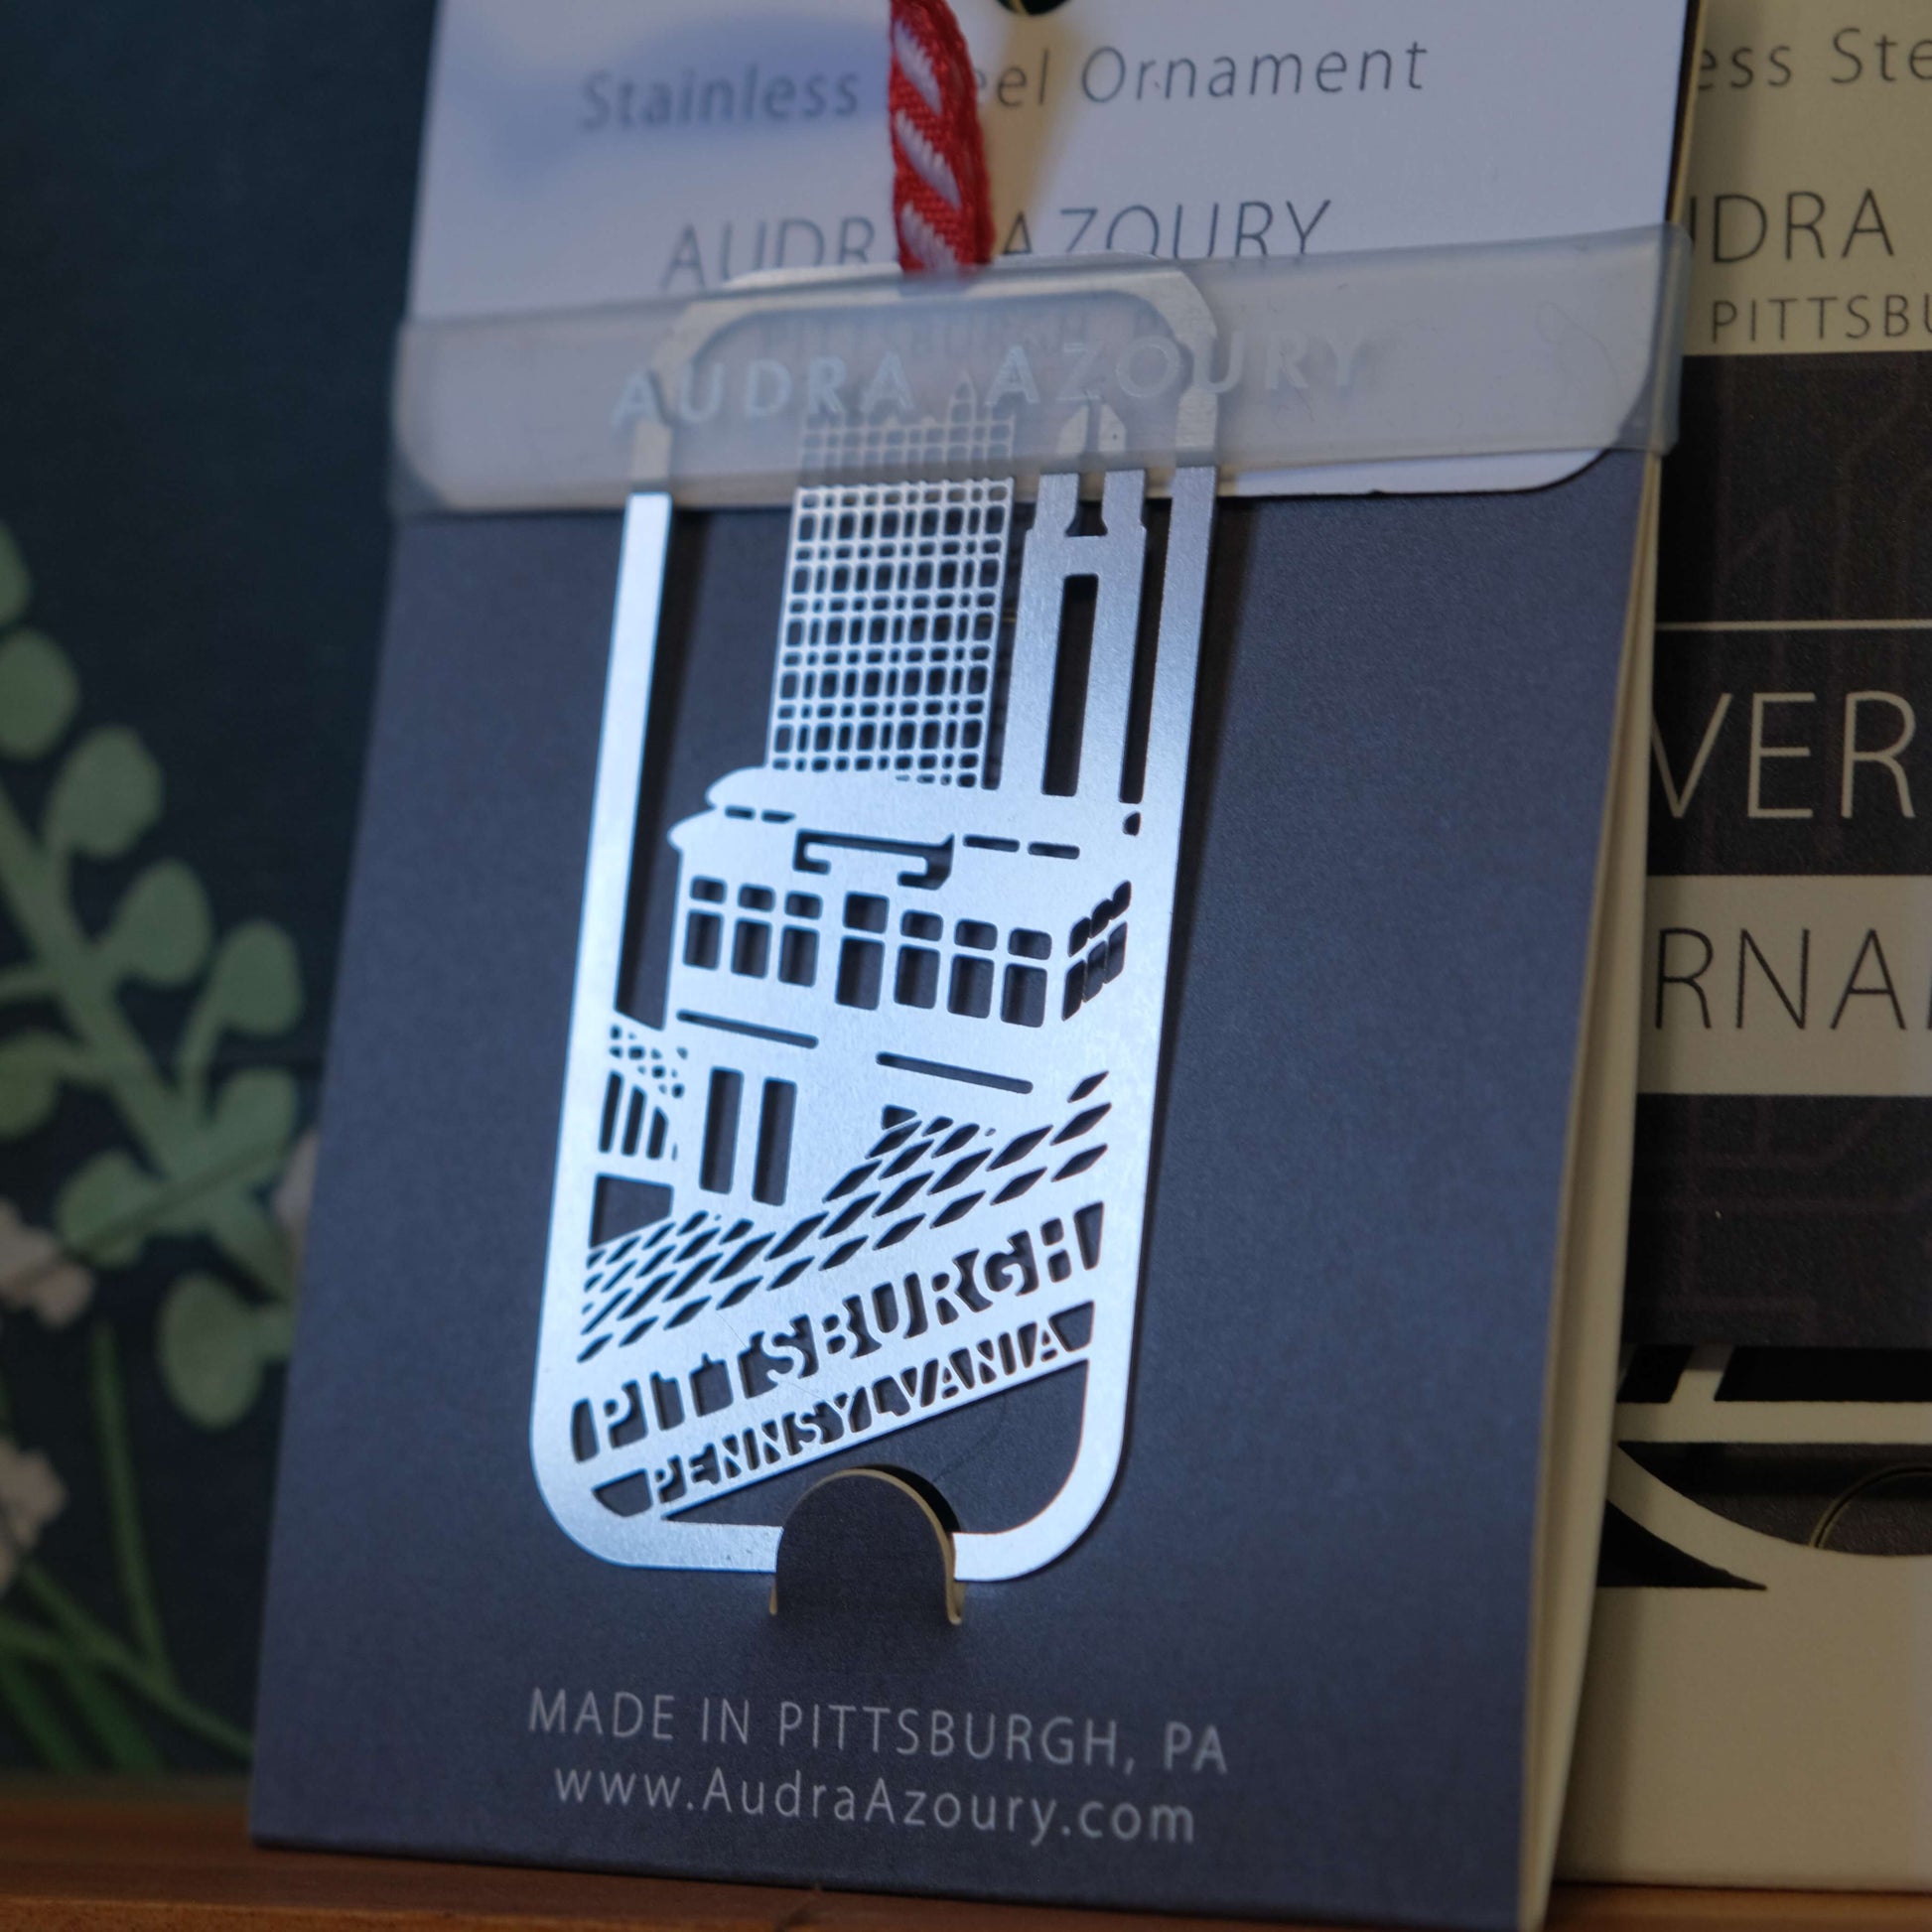 Duquesne Incline Ornament, Pittsburgh by Audra Azoury